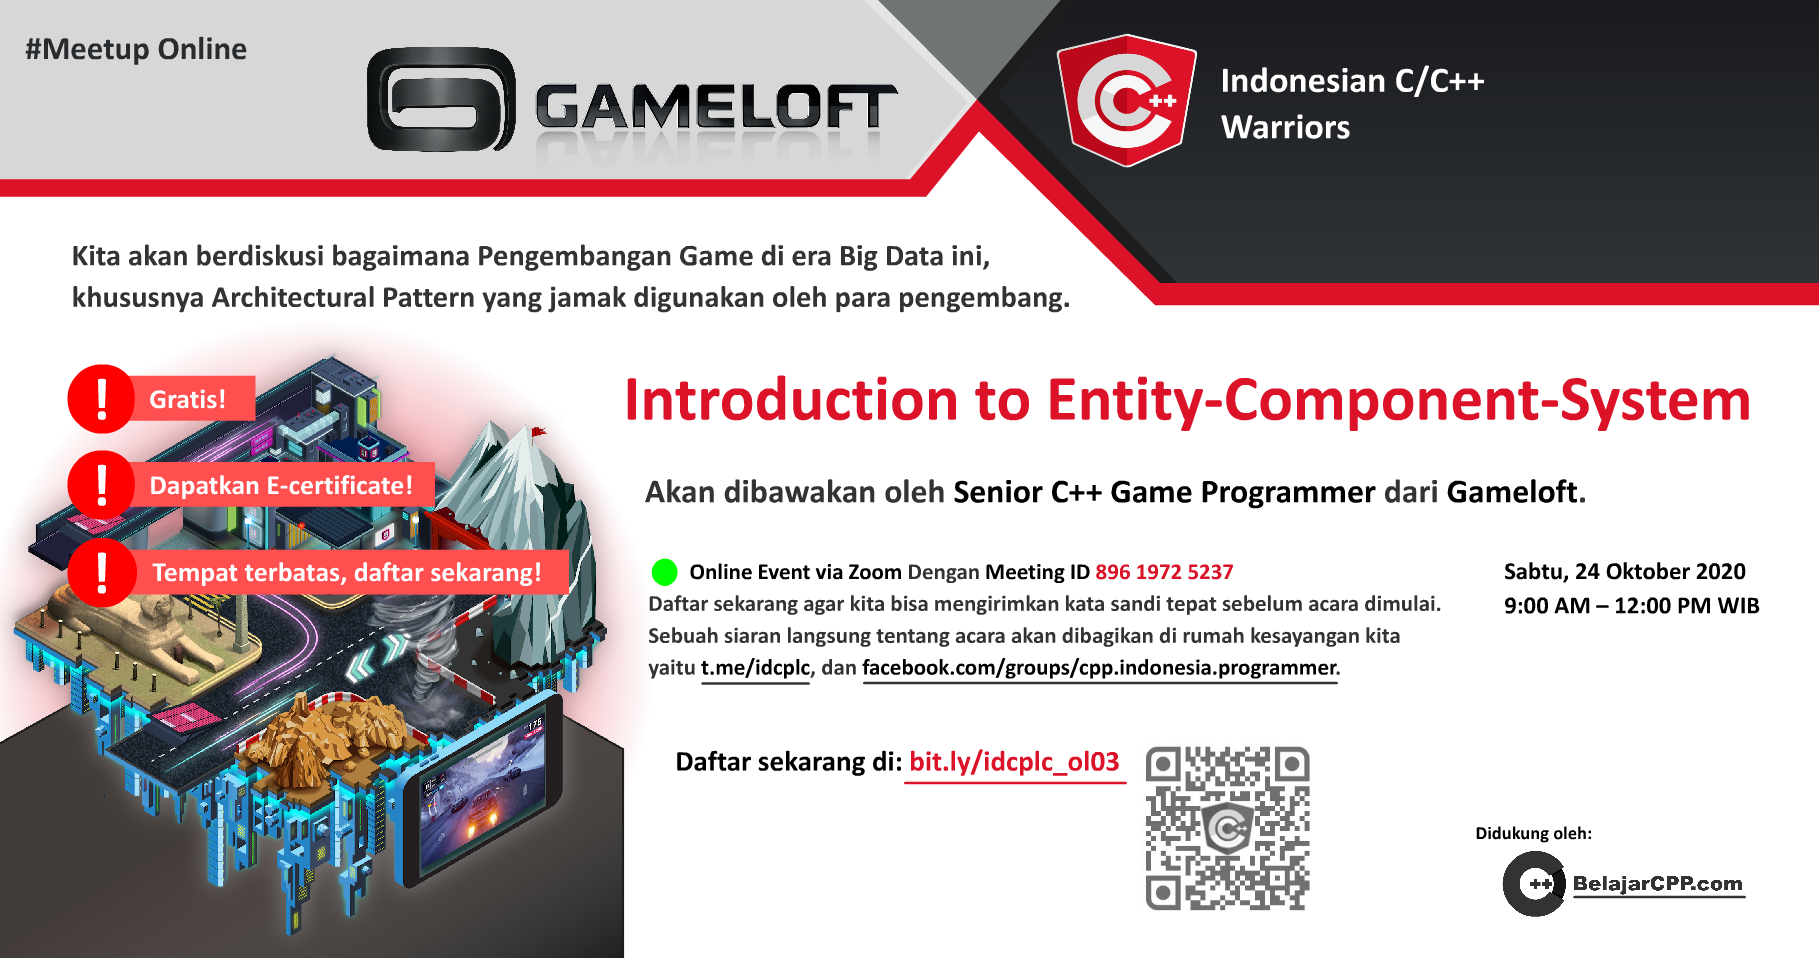 Introduction to Entity-Component-System - Indonesian C/C++ Warriors X Gameloft - Online Meetup 24 Oktober 2020